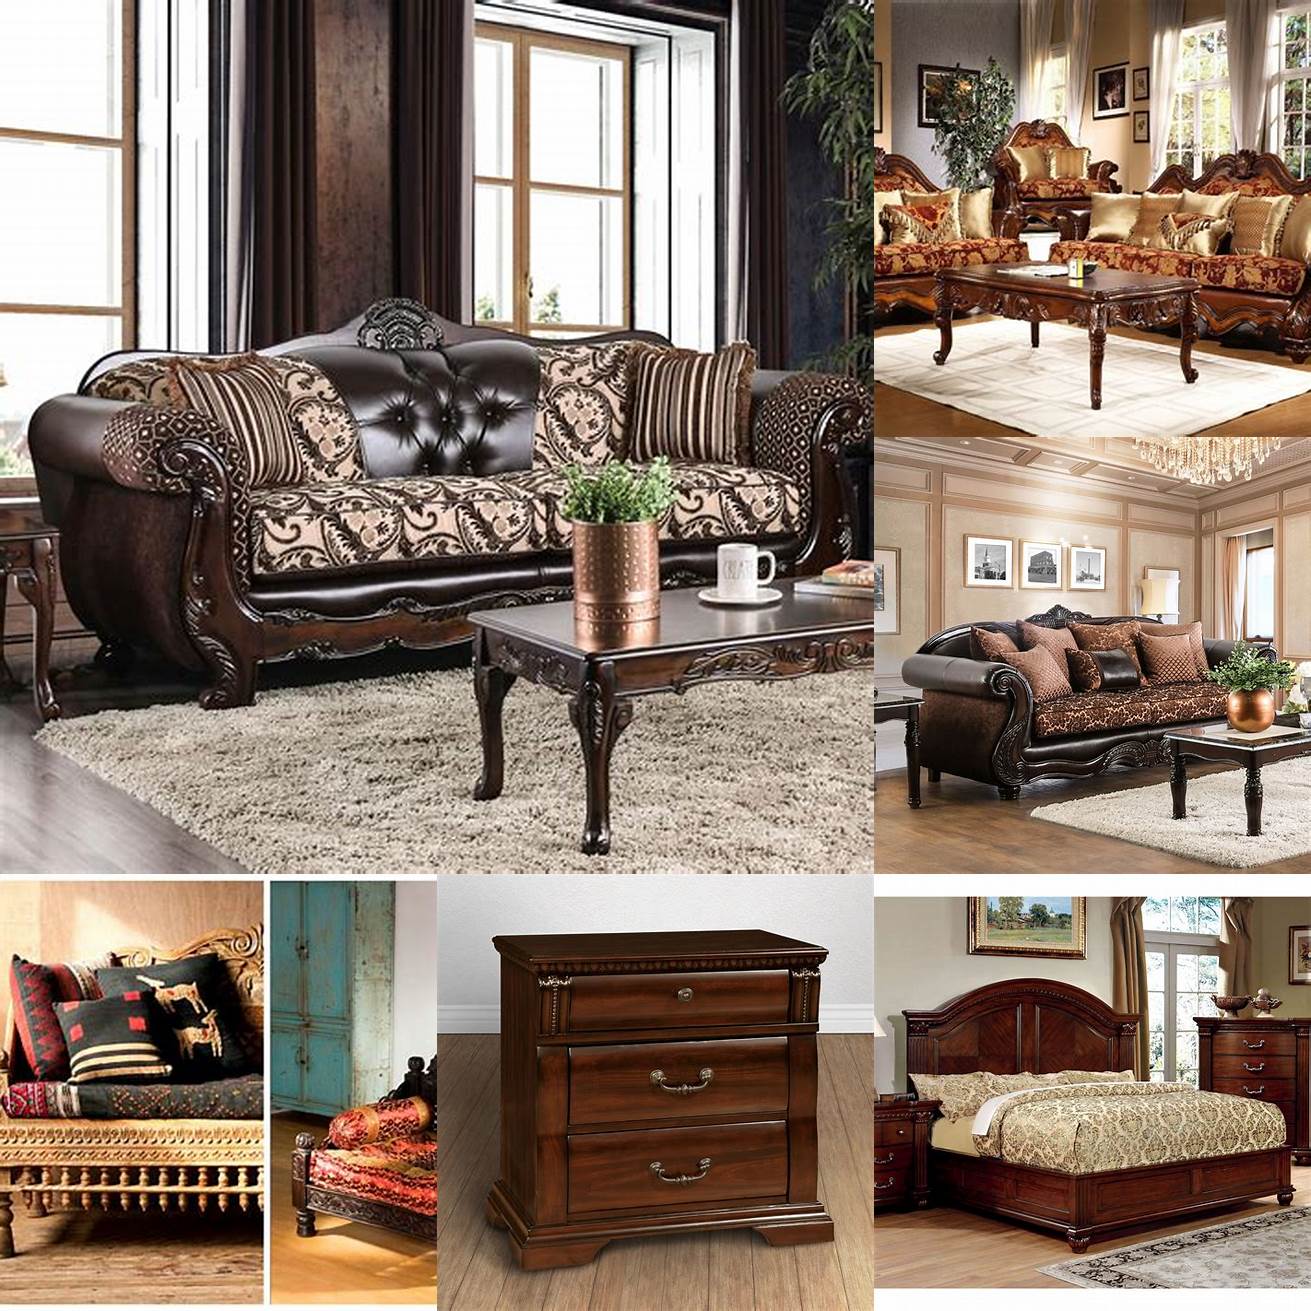 Traditional wooden furniture